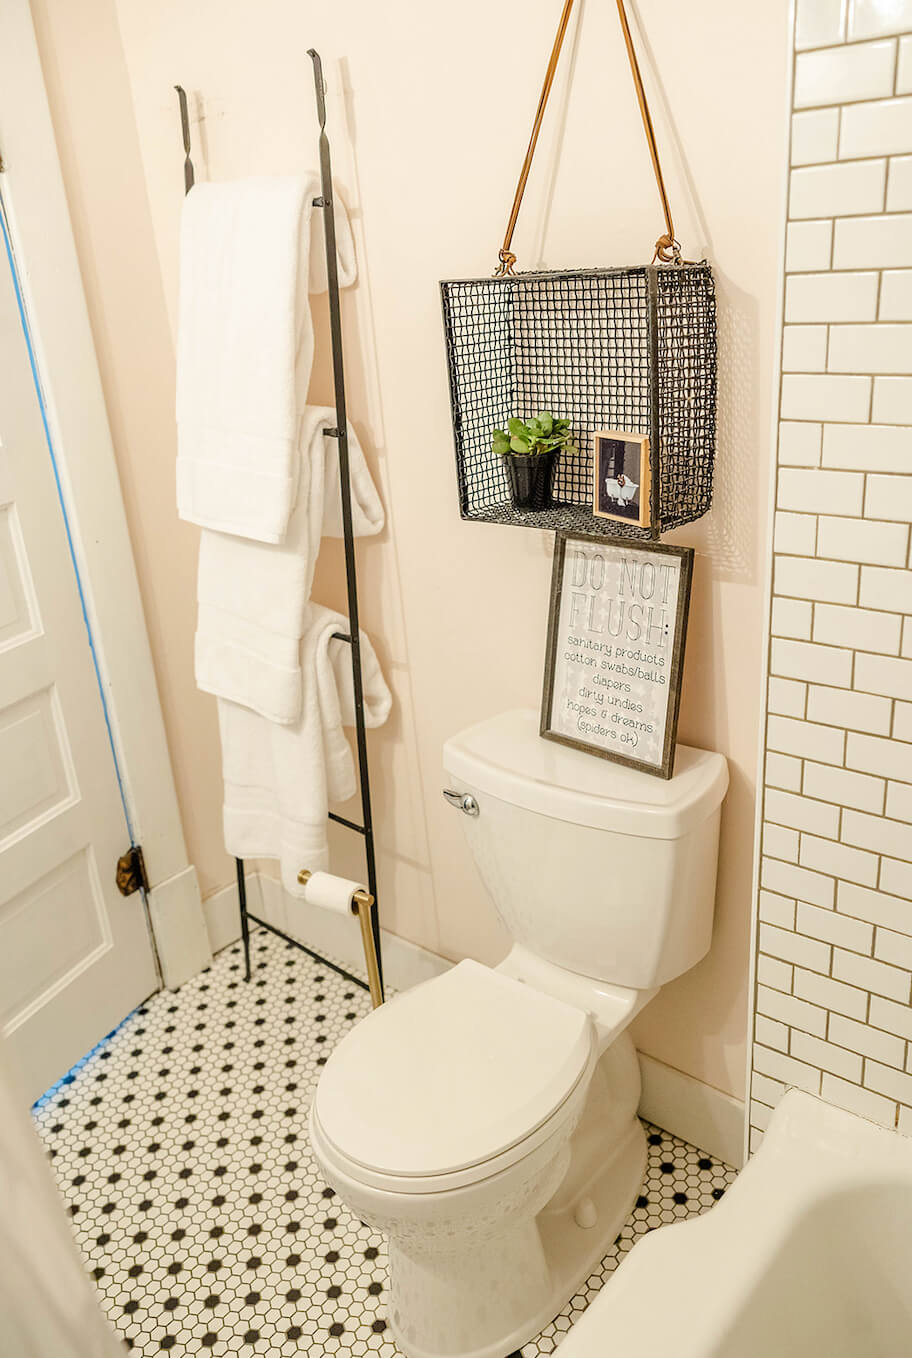 Renovated bathroom with pink walls and classic tile. Ladder holding towels. Pink floral wall decals.